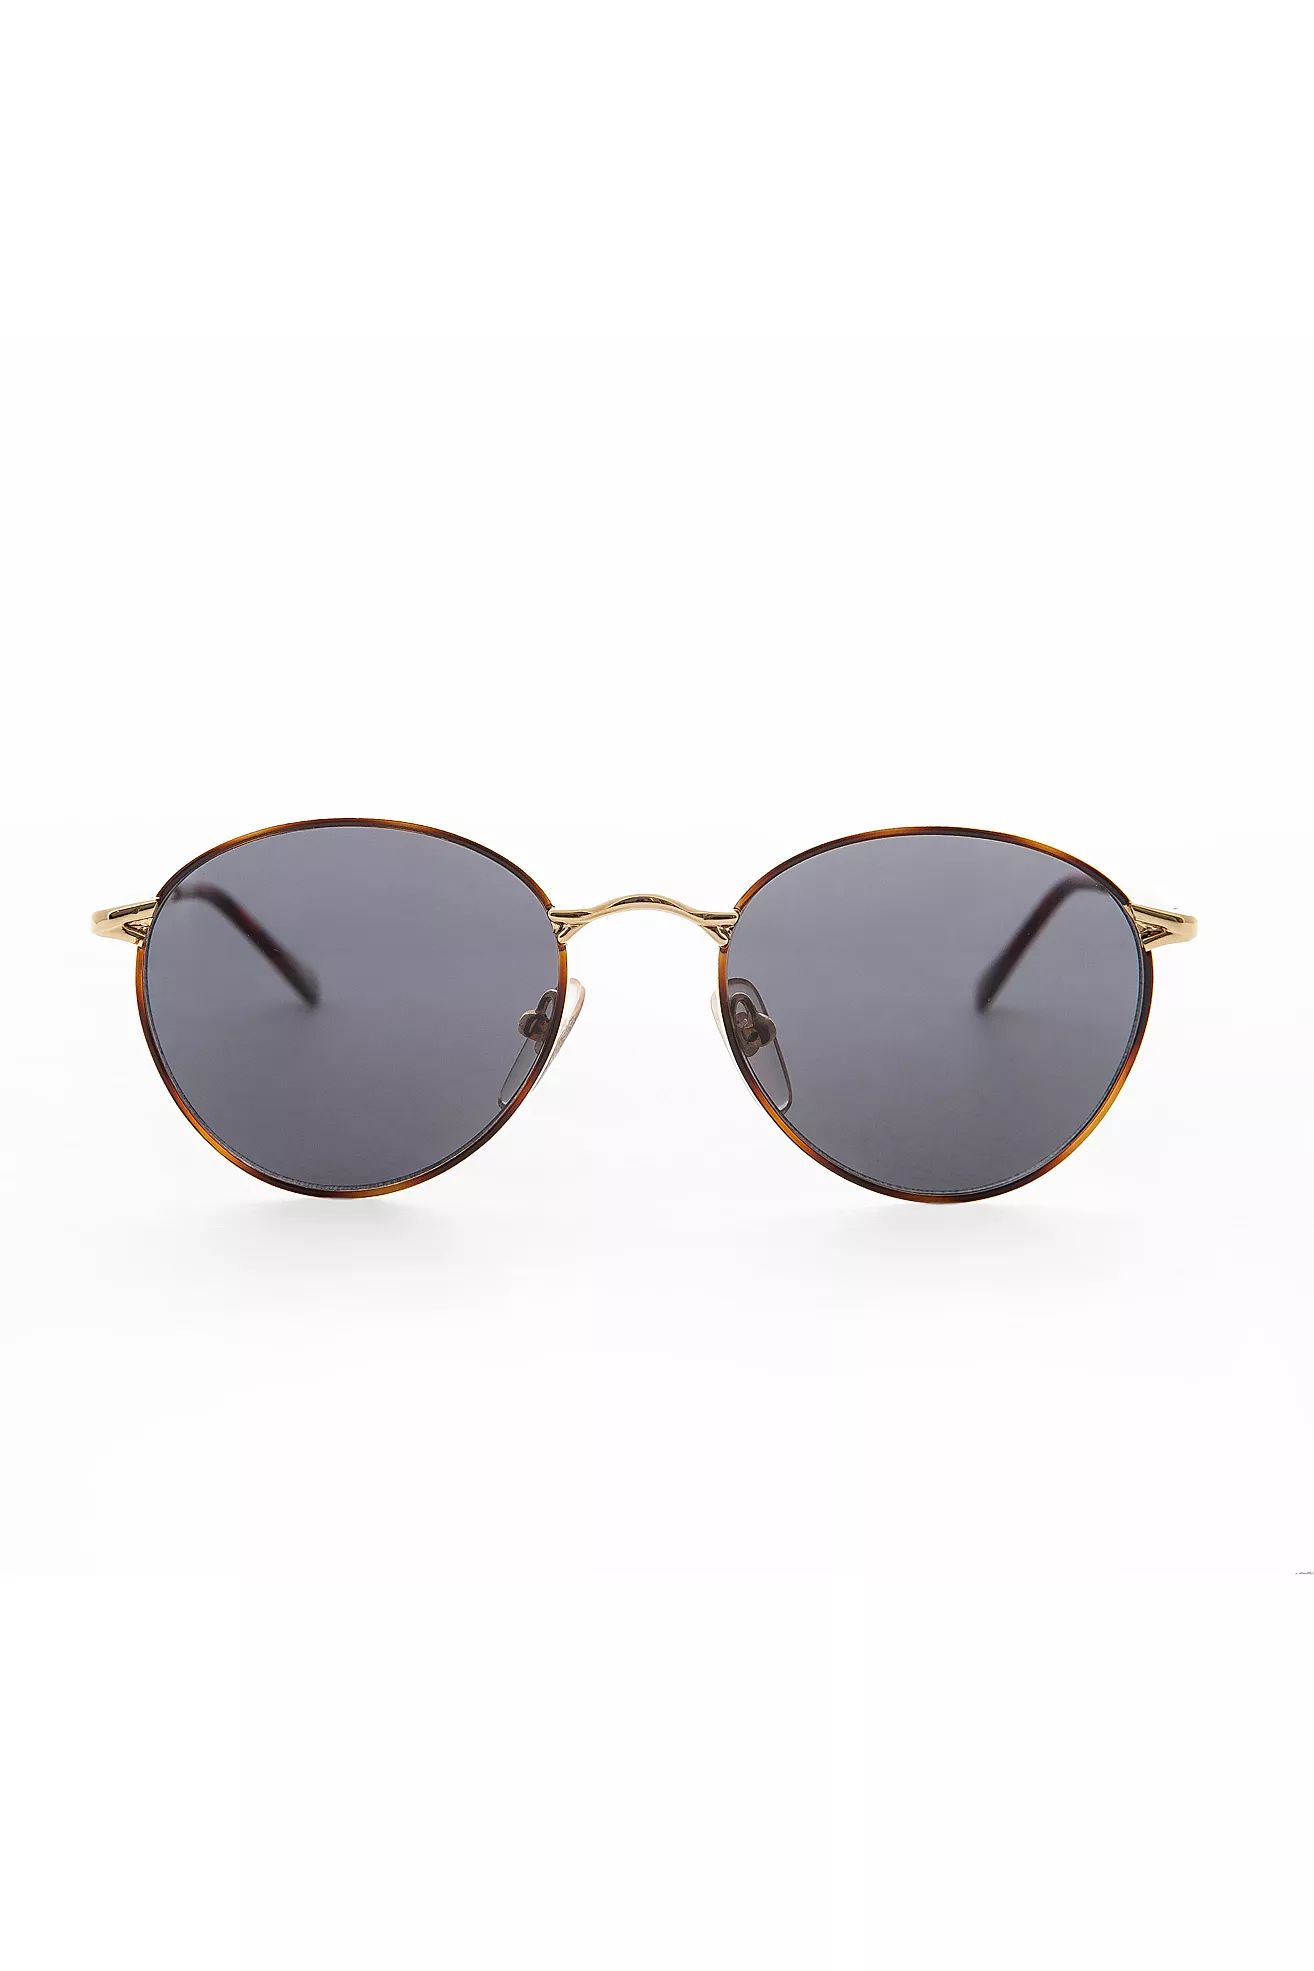 Vintage Kelsey Sunglasses Selected by Sunglass Museum | Free People (Global - UK&FR Excluded)